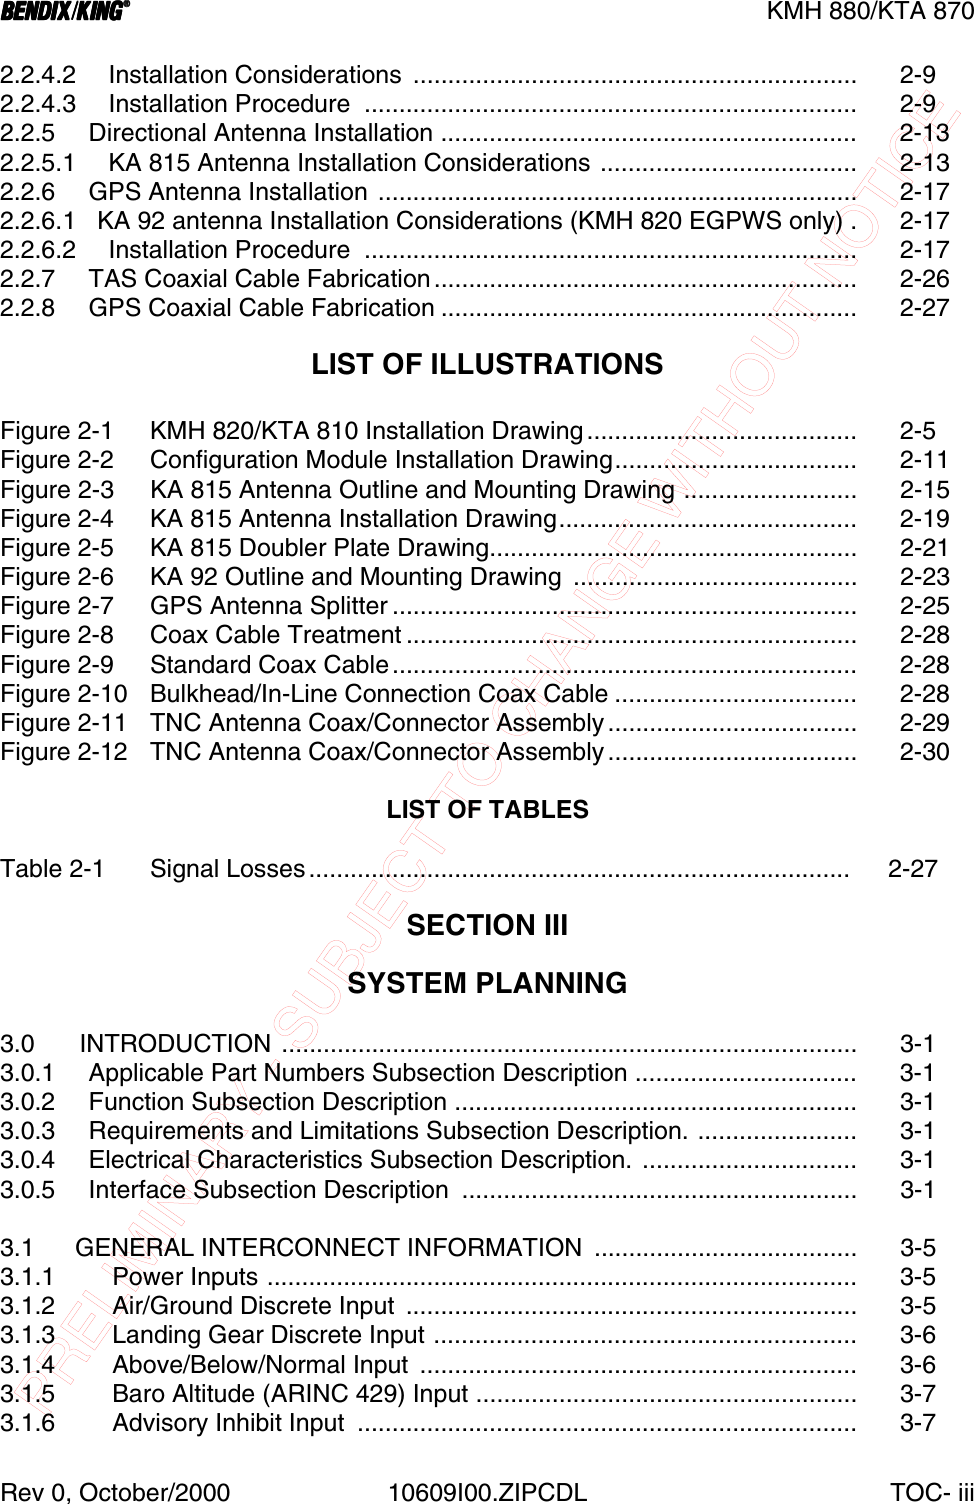 PRELIMINARY - SUBJECT TO CHANGE WITHOUT NOTICEBBBBKMH 880/KTA 870Rev 0, October/2000 10609I00.ZIPCDL TOC- iii2.2.4.2 Installation Considerations  ................................................................ 2-92.2.4.3 Installation Procedure  ....................................................................... 2-92.2.5   Directional Antenna Installation ............................................................ 2-132.2.5.1 KA 815 Antenna Installation Considerations ..................................... 2-132.2.6   GPS Antenna Installation ..................................................................... 2-172.2.6.1   KA 92 antenna Installation Considerations (KMH 820 EGPWS only) . 2-172.2.6.2 Installation Procedure  ....................................................................... 2-172.2.7   TAS Coaxial Cable Fabrication............................................................. 2-262.2.8   GPS Coaxial Cable Fabrication ............................................................ 2-27LIST OF ILLUSTRATIONSFigure 2-1 KMH 820/KTA 810 Installation Drawing....................................... 2-5Figure 2-2  Configuration Module Installation Drawing................................... 2-11Figure 2-3 KA 815 Antenna Outline and Mounting Drawing ......................... 2-15Figure 2-4 KA 815 Antenna Installation Drawing........................................... 2-19Figure 2-5 KA 815 Doubler Plate Drawing..................................................... 2-21Figure 2-6  KA 92 Outline and Mounting Drawing  ......................................... 2-23Figure 2-7 GPS Antenna Splitter ................................................................... 2-25Figure 2-8 Coax Cable Treatment ................................................................. 2-28Figure 2-9 Standard Coax Cable................................................................... 2-28Figure 2-10 Bulkhead/In-Line Connection Coax Cable ................................... 2-28Figure 2-11 TNC Antenna Coax/Connector Assembly.................................... 2-29Figure 2-12 TNC Antenna Coax/Connector Assembly.................................... 2-30LIST OF TABLESTable 2-1 Signal Losses..............................................................................  2-27SECTION IIISYSTEM PLANNING3.0  INTRODUCTION ................................................................................... 3-13.0.1   Applicable Part Numbers Subsection Description ................................ 3-13.0.2   Function Subsection Description .......................................................... 3-13.0.3   Requirements and Limitations Subsection Description. ....................... 3-13.0.4   Electrical Characteristics Subsection Description. ............................... 3-13.0.5   Interface Subsection Description  ......................................................... 3-13.1 GENERAL INTERCONNECT INFORMATION  ...................................... 3-53.1.1 Power Inputs ..................................................................................... 3-53.1.2 Air/Ground Discrete Input  ................................................................. 3-53.1.3 Landing Gear Discrete Input ............................................................. 3-63.1.4 Above/Below/Normal Input  ............................................................... 3-63.1.5 Baro Altitude (ARINC 429) Input ....................................................... 3-73.1.6 Advisory Inhibit Input  ........................................................................ 3-7